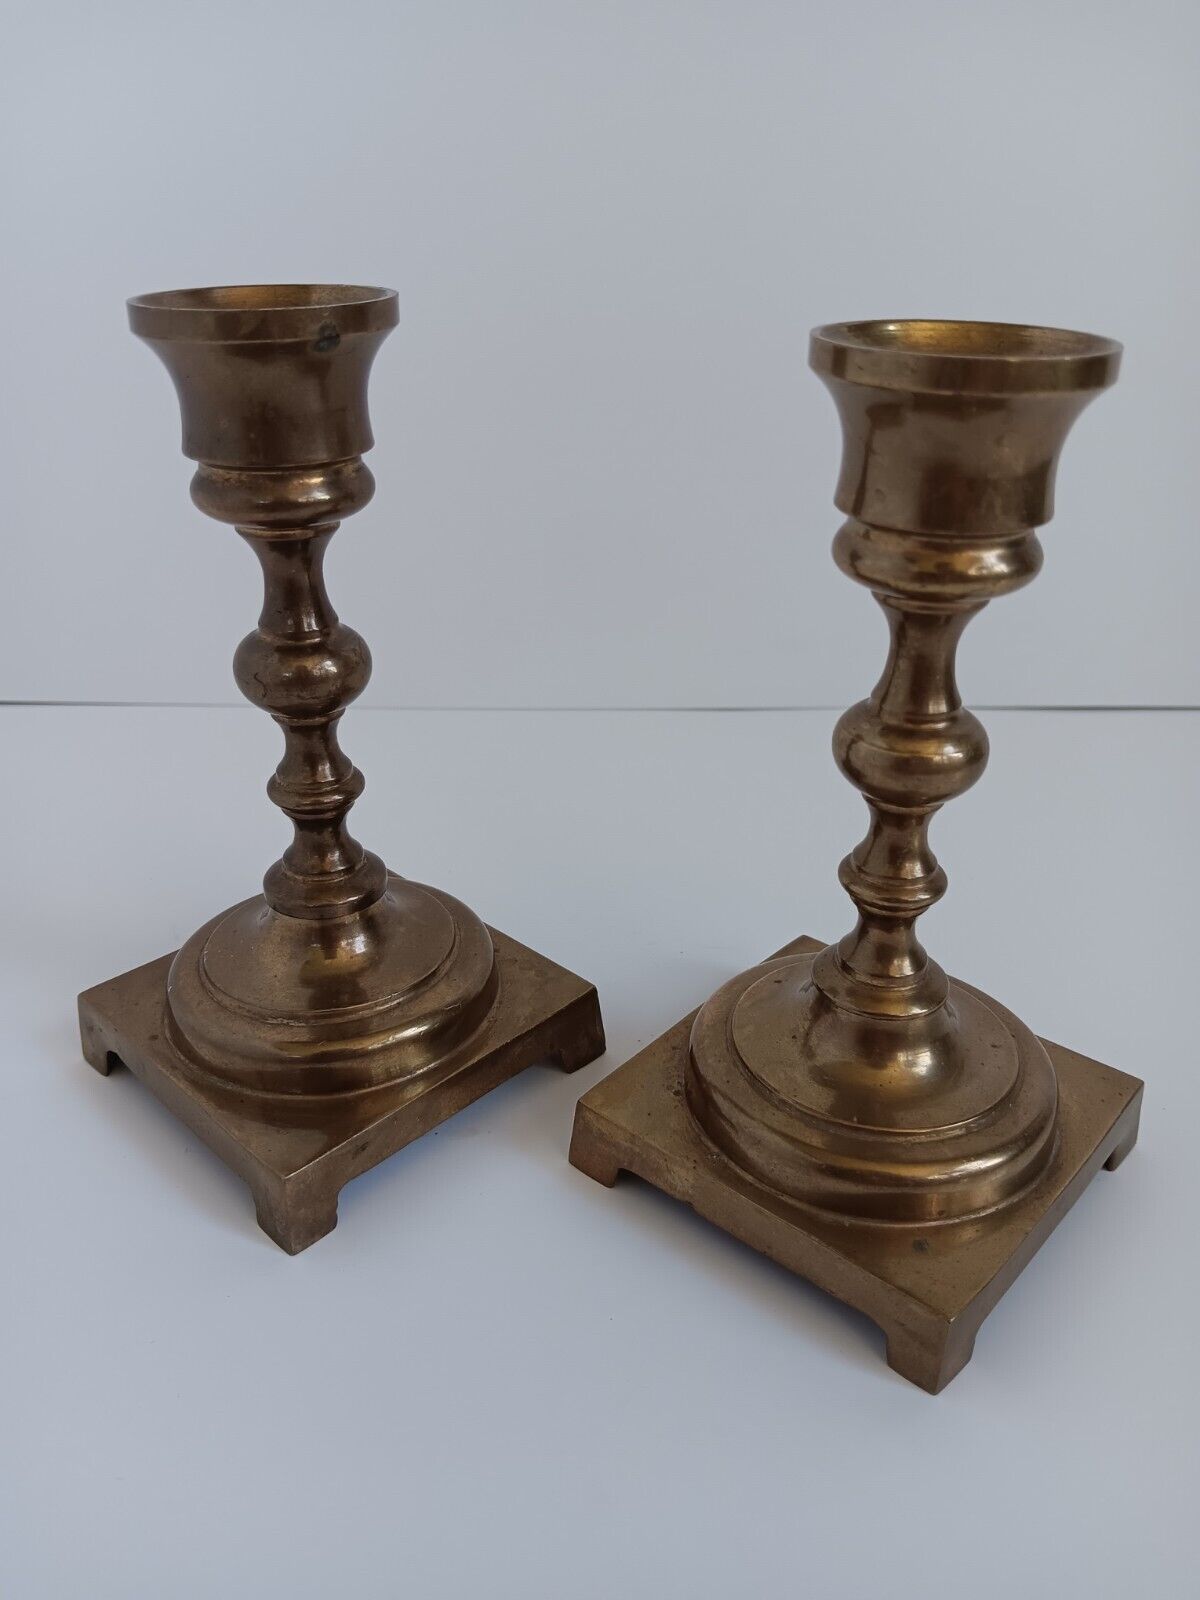 Vintage Solid Brass Candle Holders Made In Taiwan Republic Of China 5 In Tall